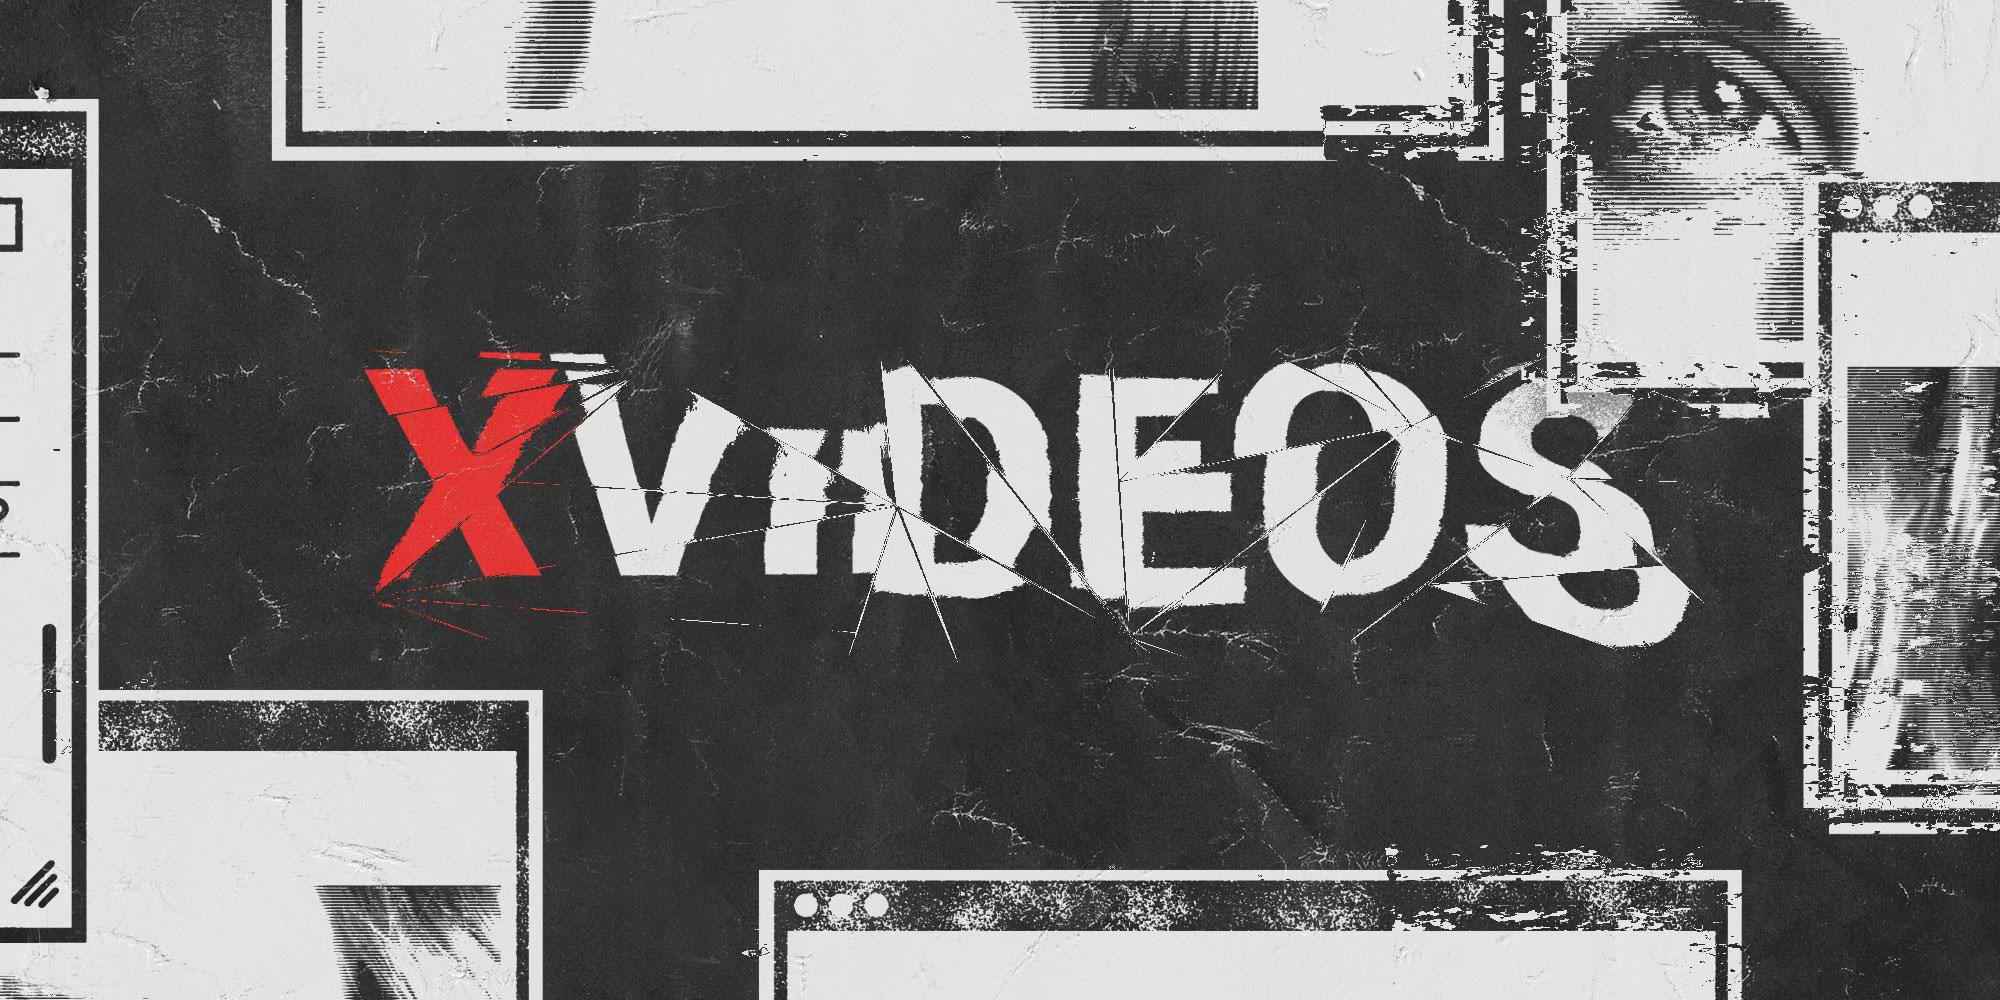 XVideos, Worlds Most Popular Porn Site, Reportedly Hosts Nonconsensual Content and Child Exploitation